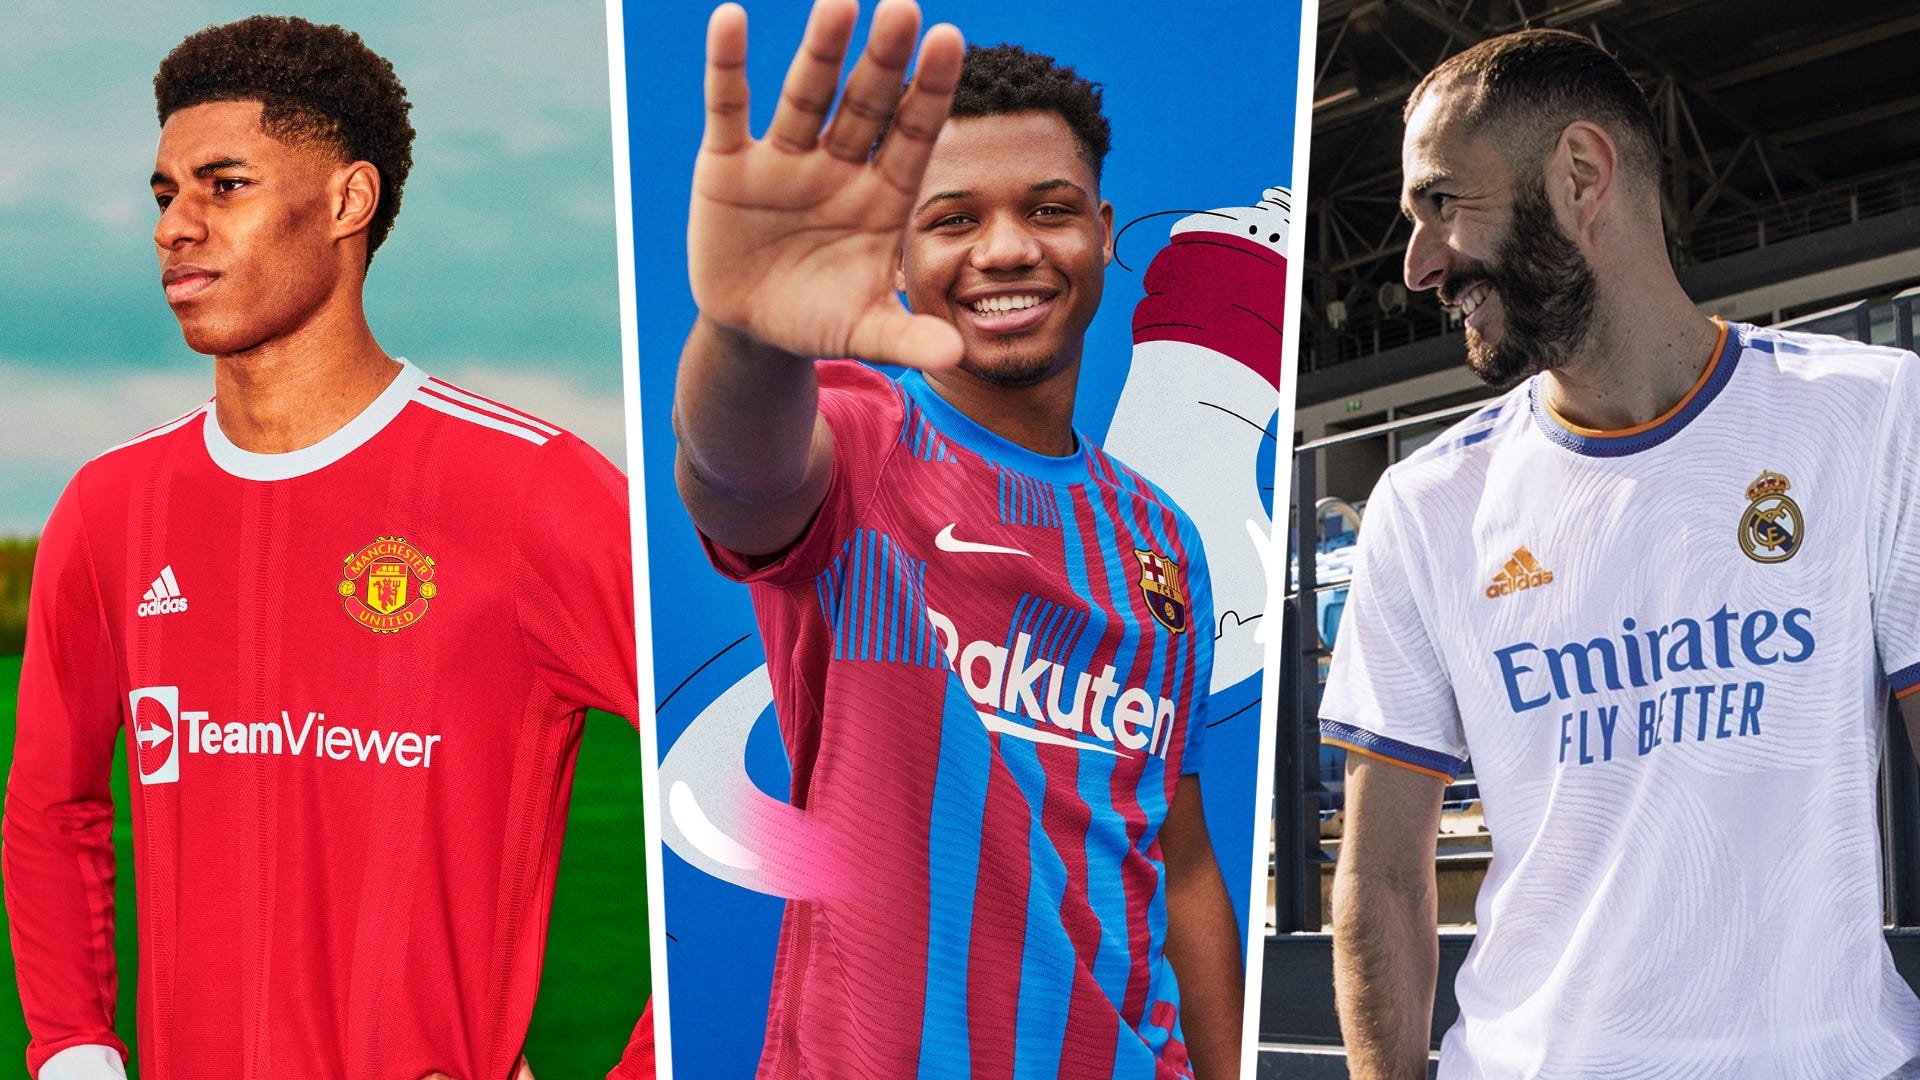 microscope tire for example New 2021-22 football kits: Barcelona, Man Utd & all the top clubs' shirts &  jerseys revealed | Goal.com US